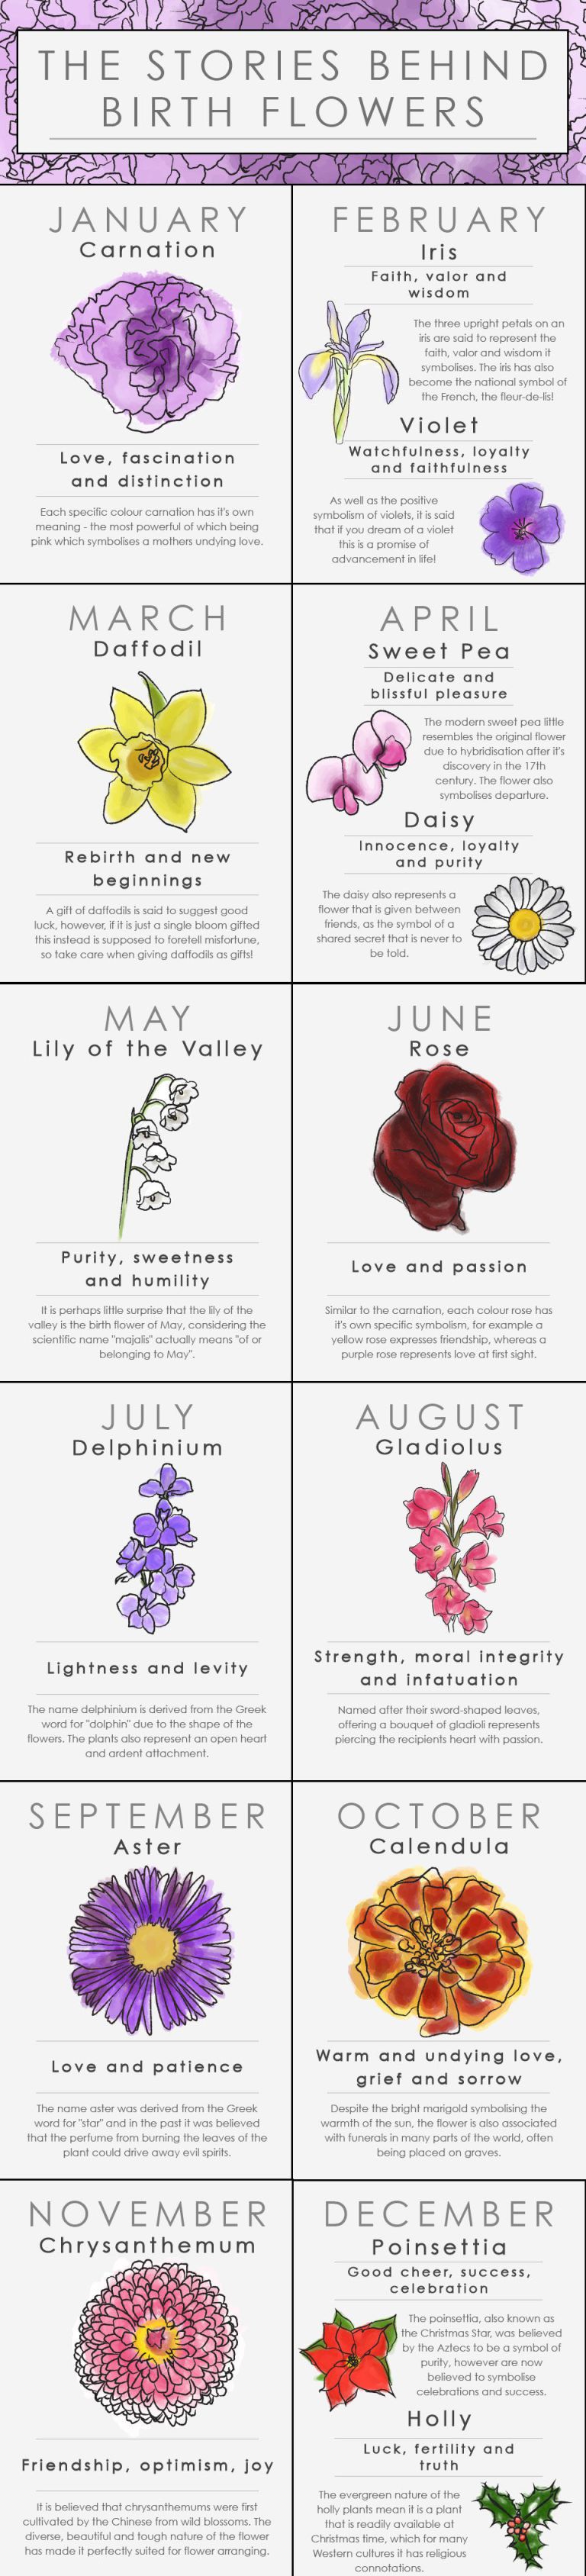 The Stories Behind Birth Flowers